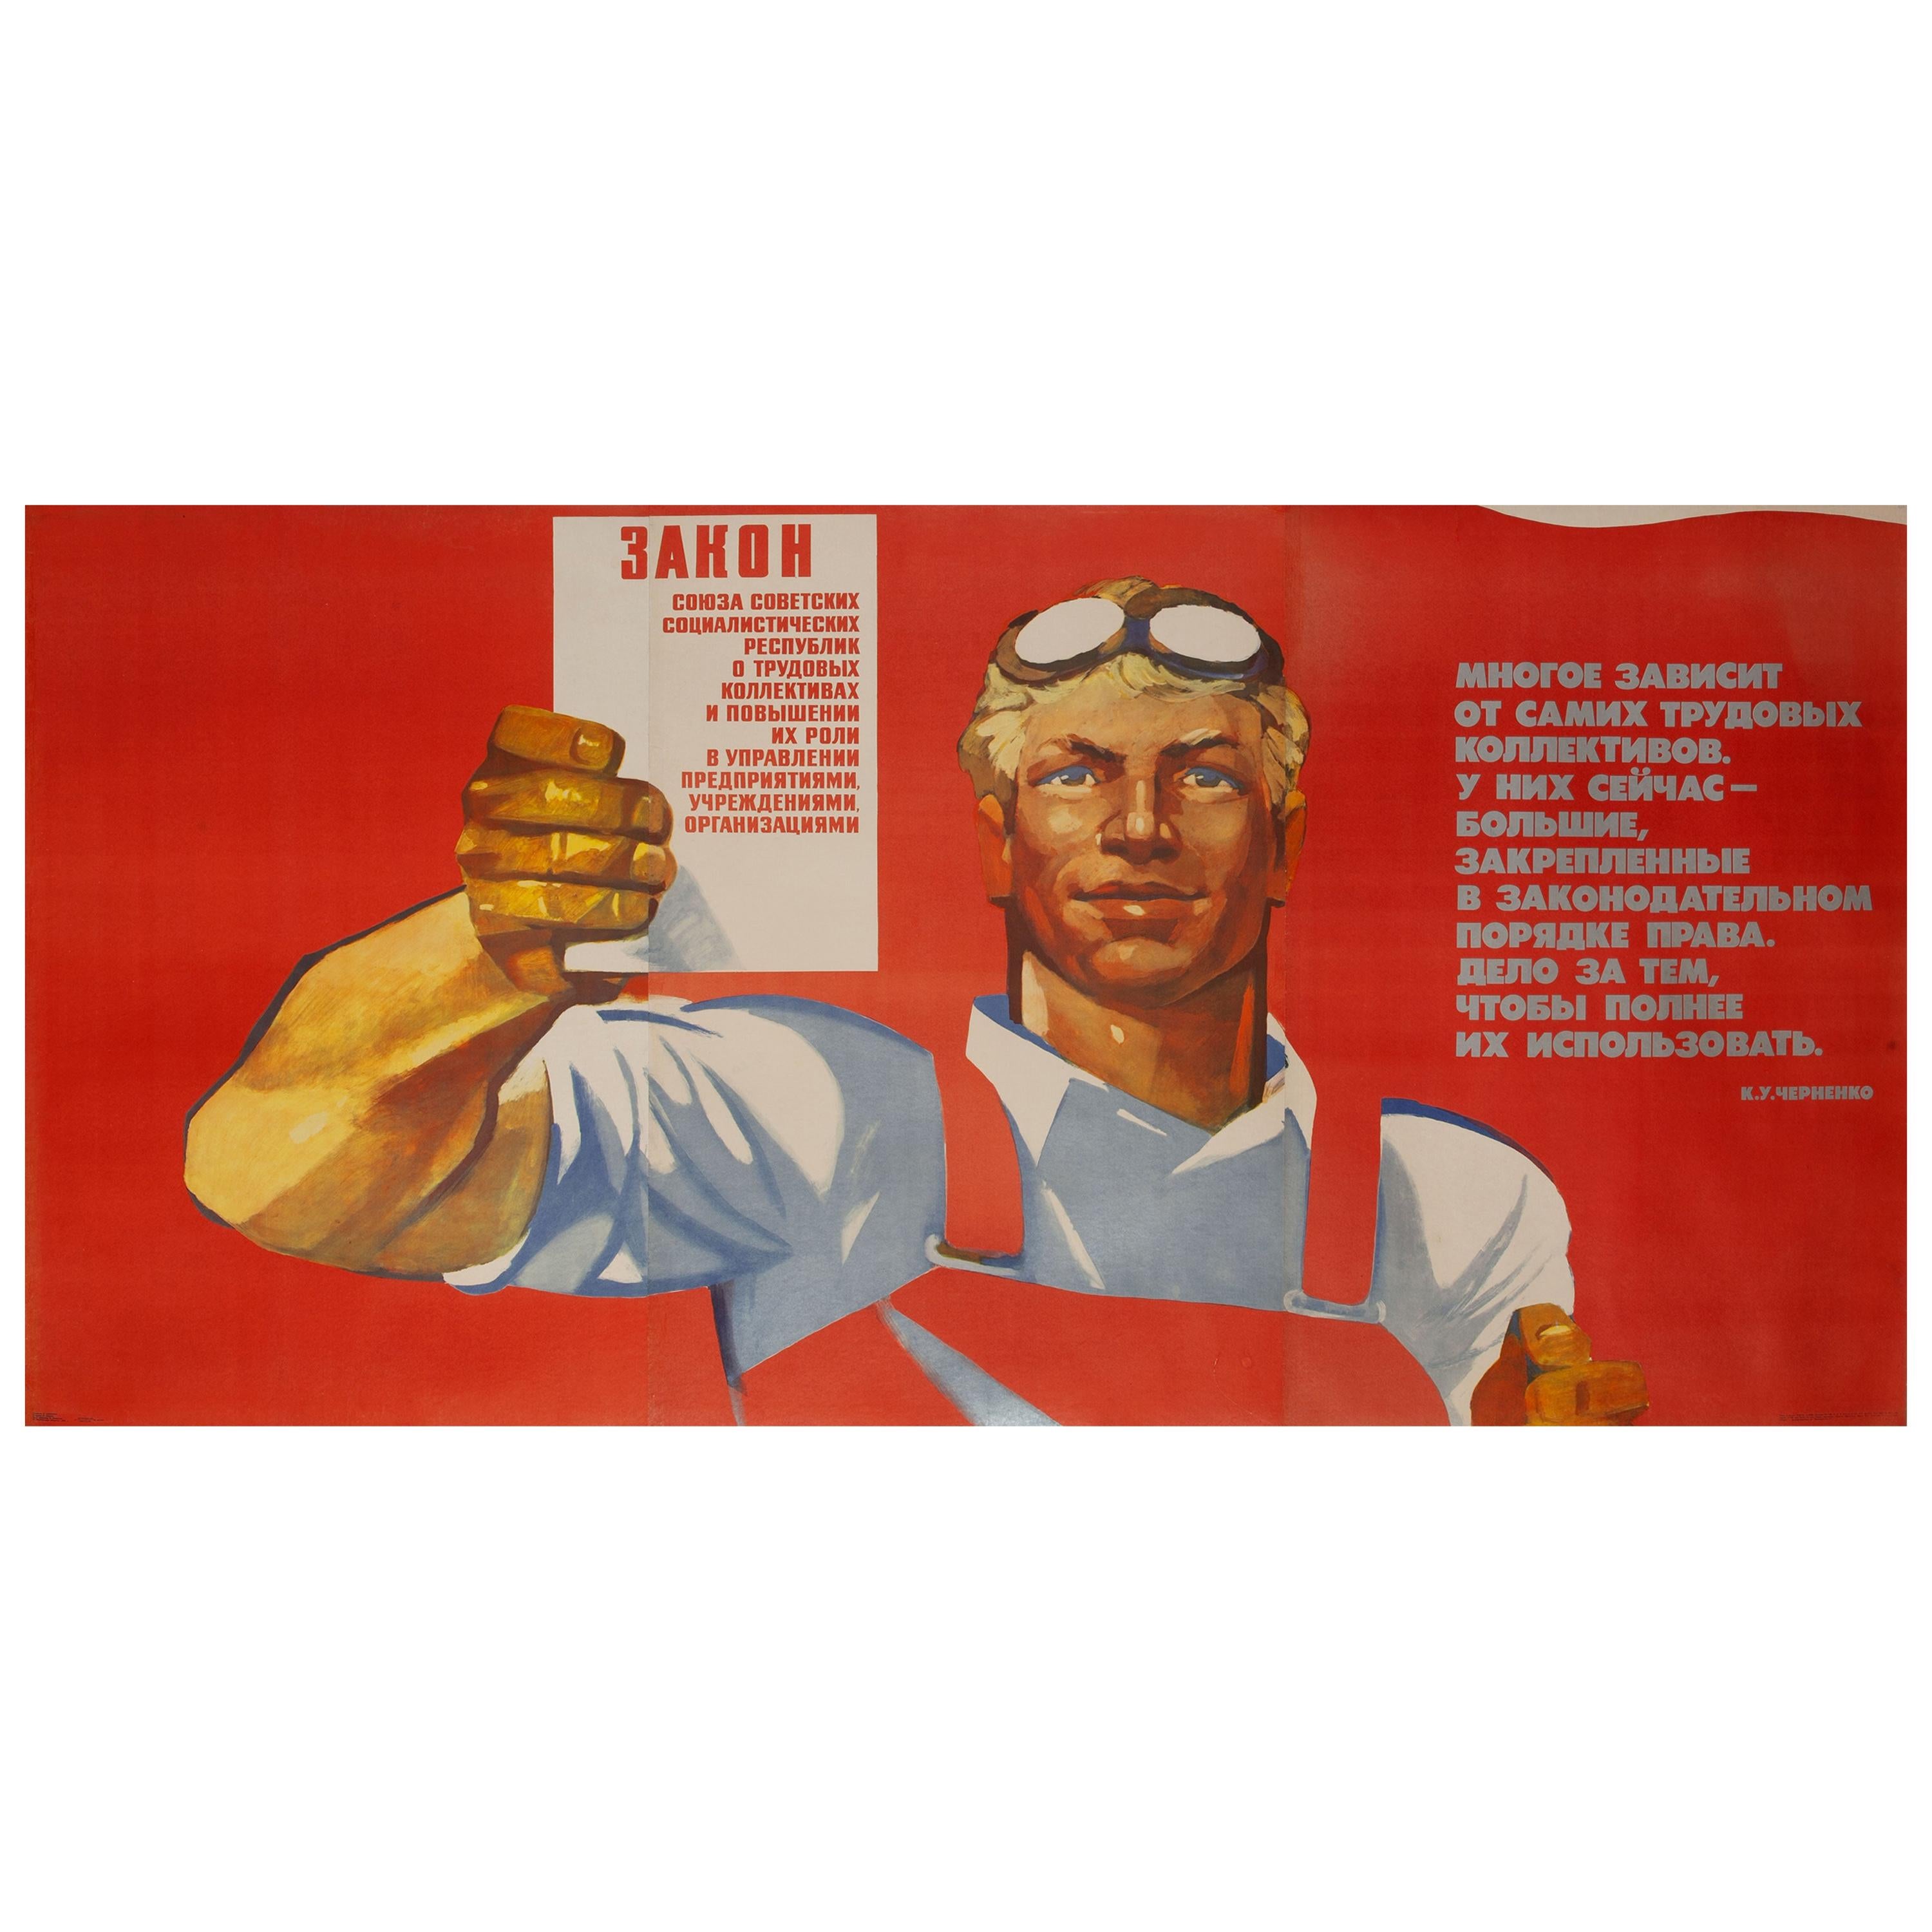 Soviet Propaganda Poster from the 1970's: Large Format  (Seven Feet by 4 Feet) For Sale